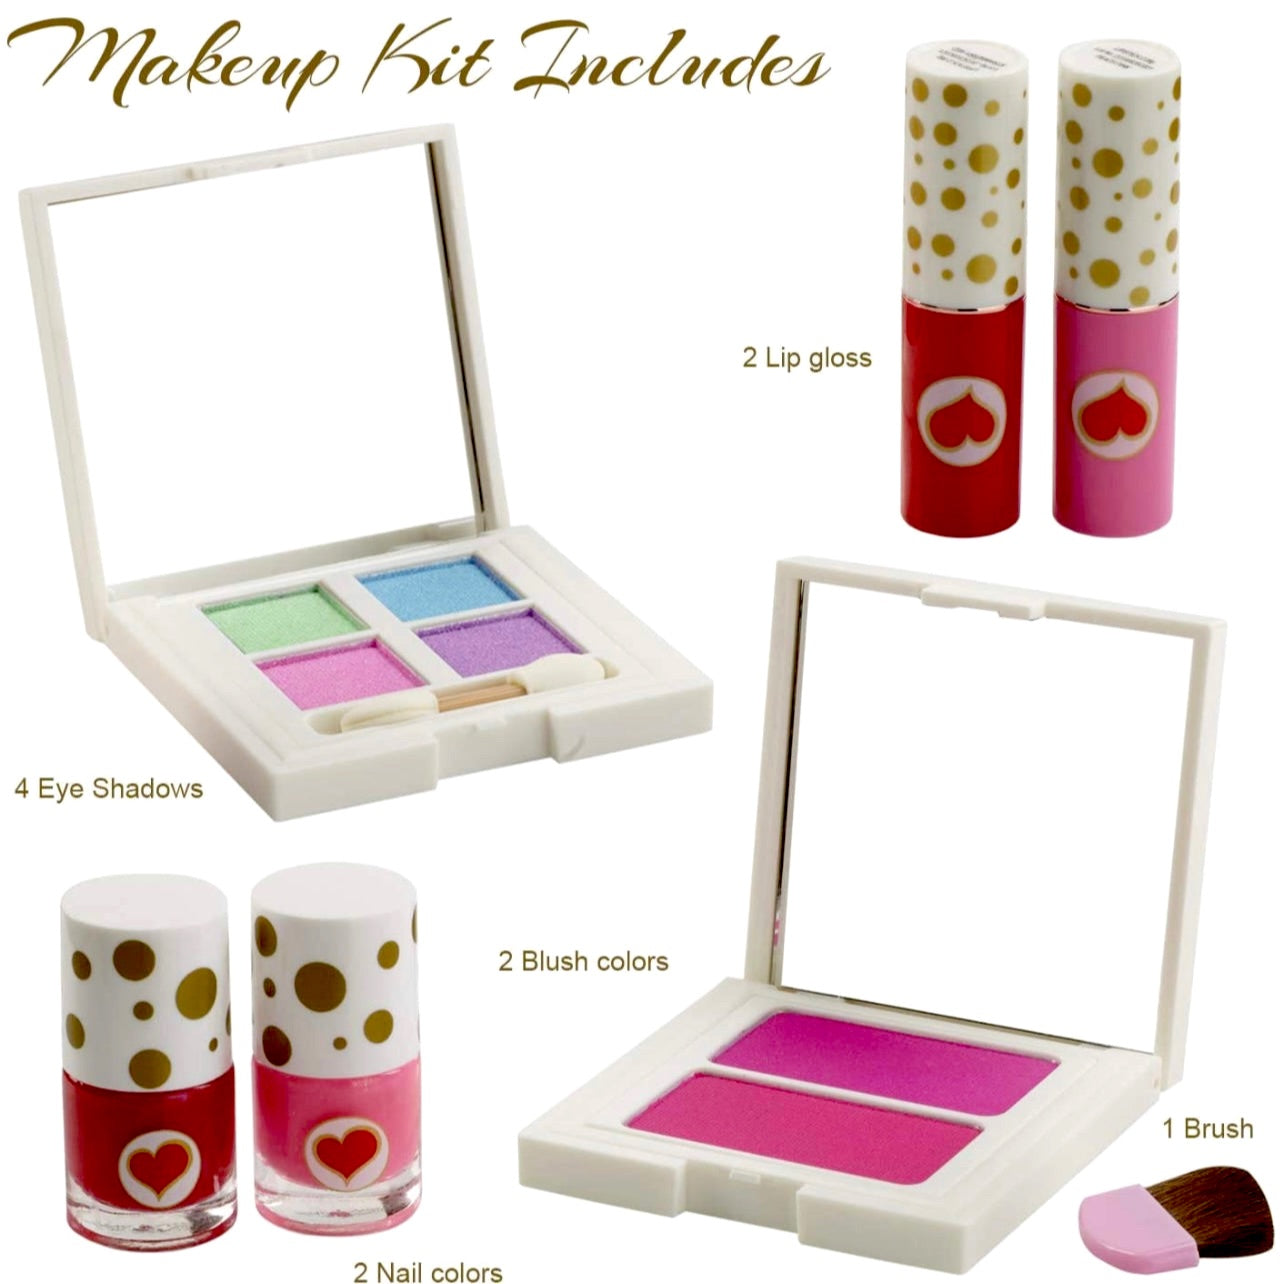 6 beauty items as followed in this luxury makeup gift set, you can expect 4 color eyeshadow palette 2 nail colors 2 lip colors and 2 blush colors all wrapped into one matching gift box with handle